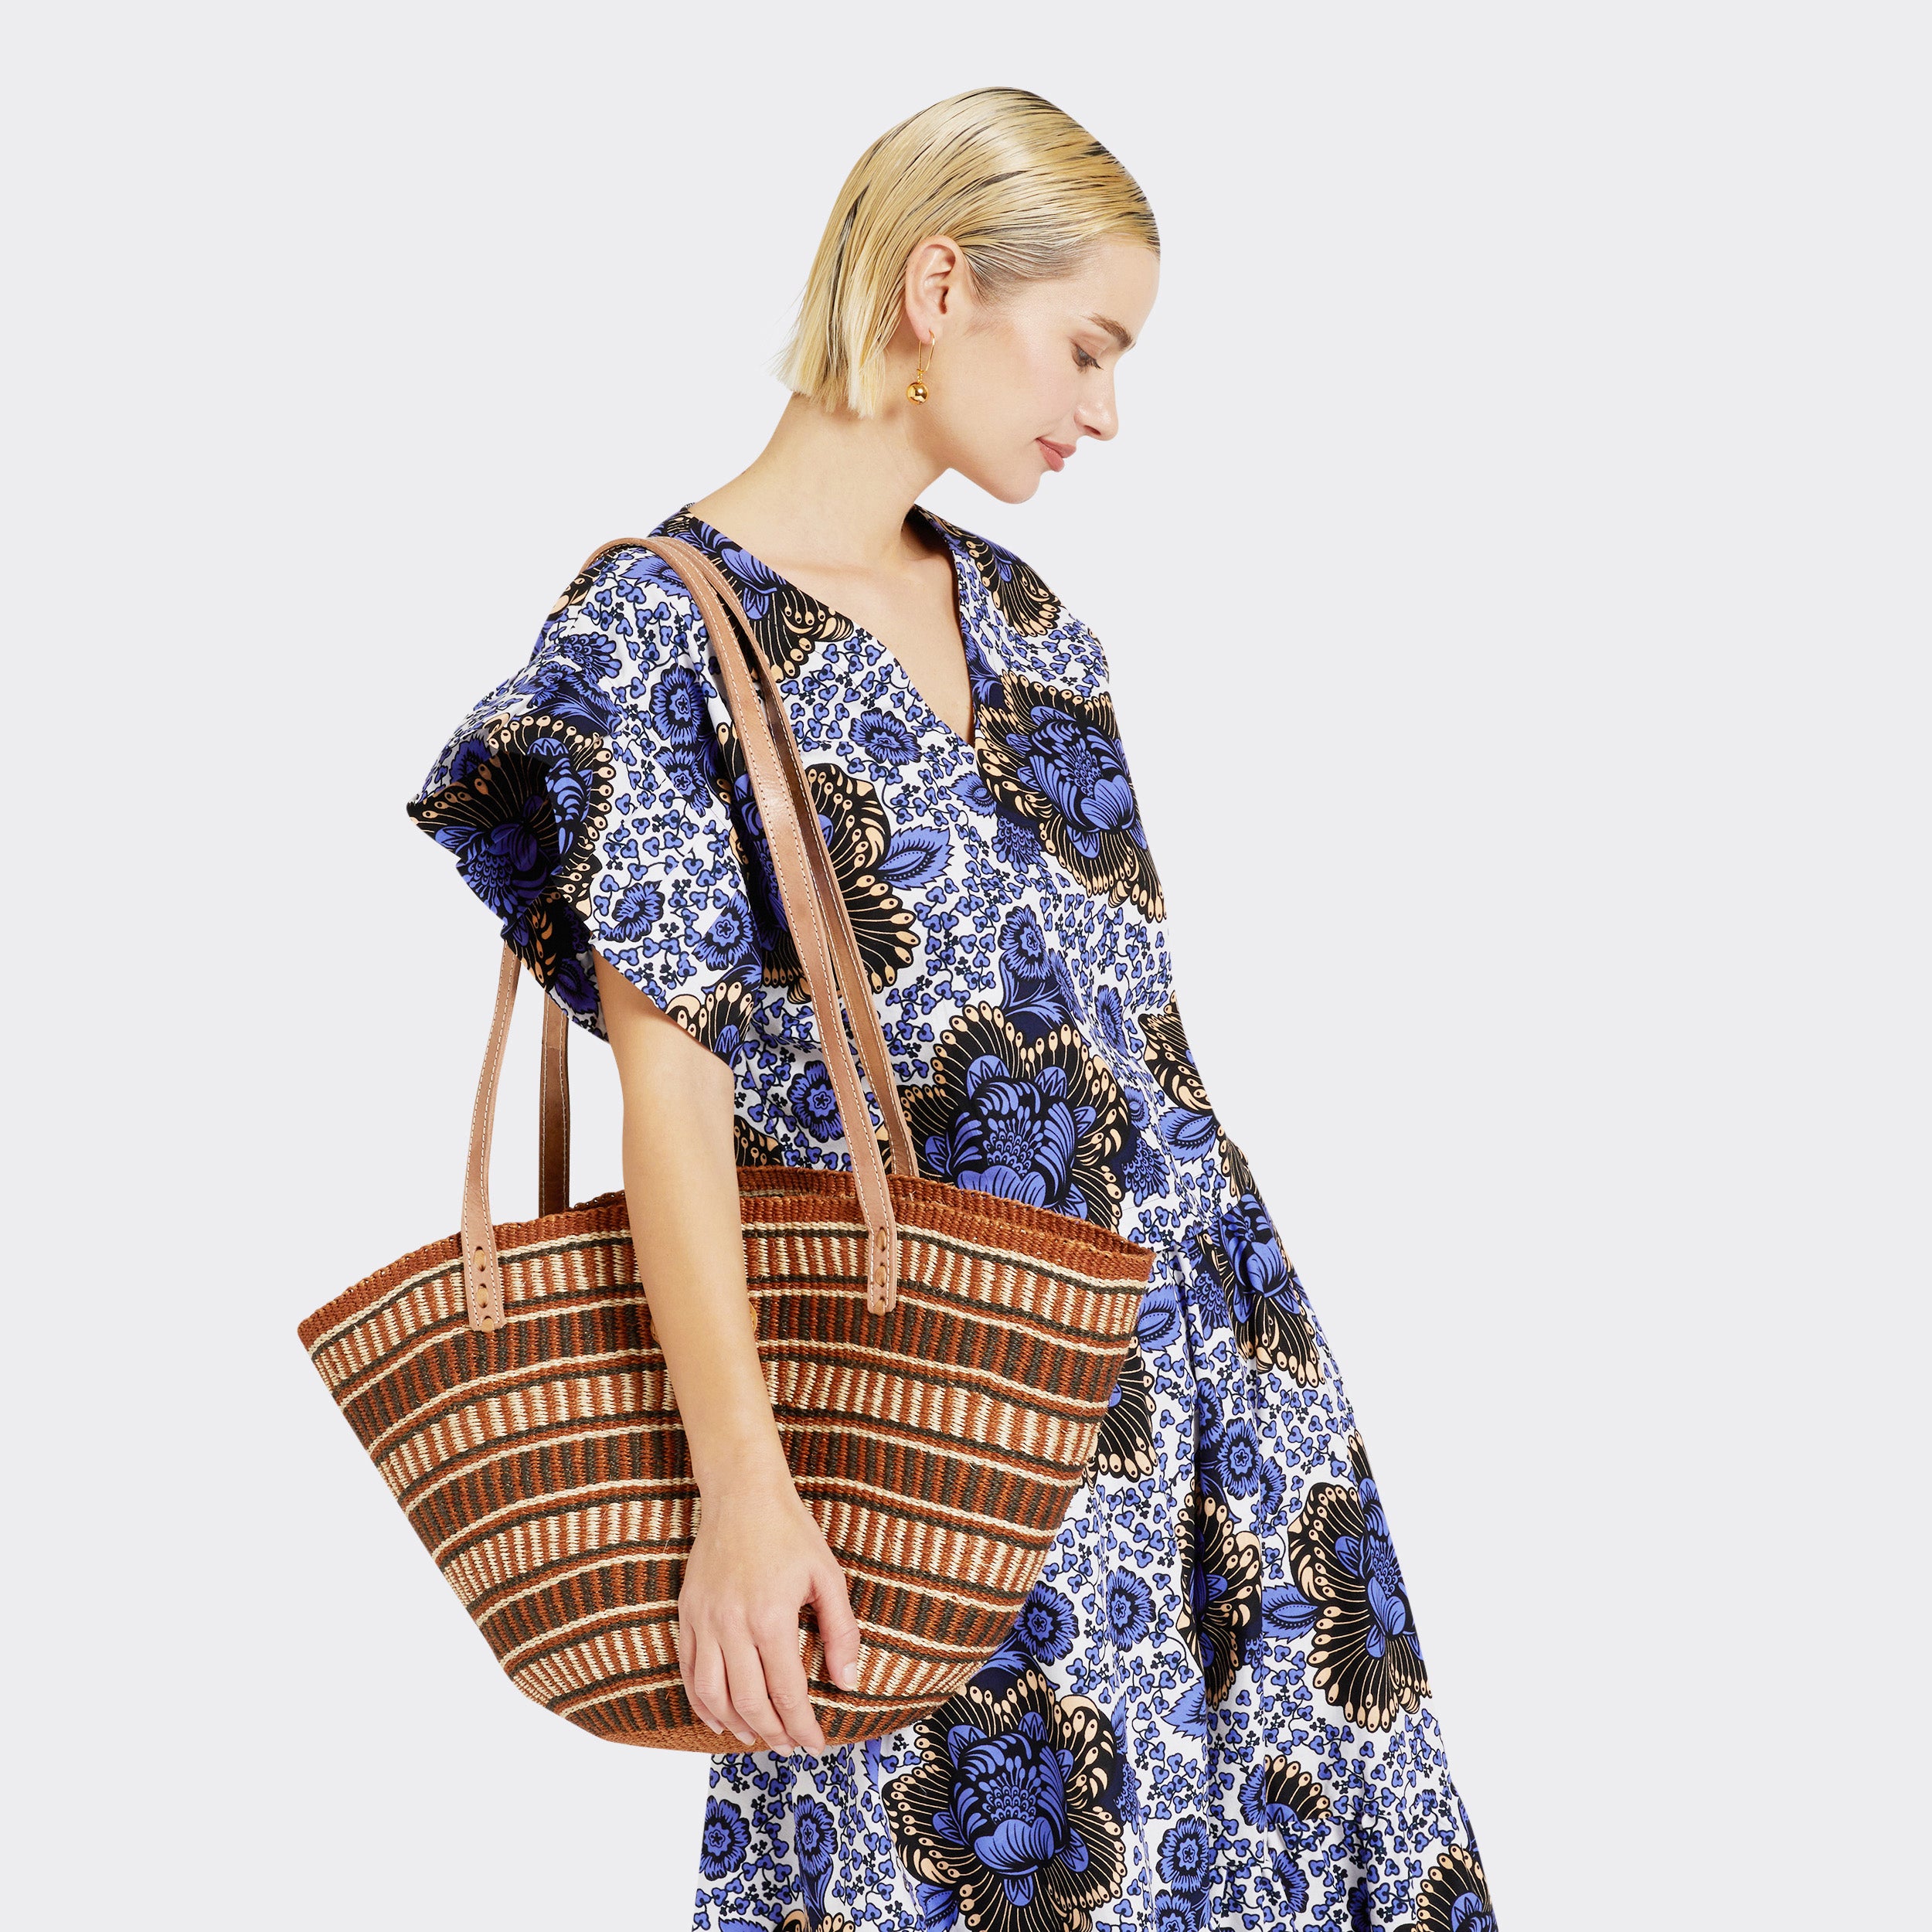 The model is holding the Shopping Bag in Sisal Brown with the color brown. Model wears Ruffled Top in Wax Lilac Peonies with the color lilac and white and the matching Flounced Maxi Skirt in Wax Lilac Peonies in the colors lilac and white for a total look.